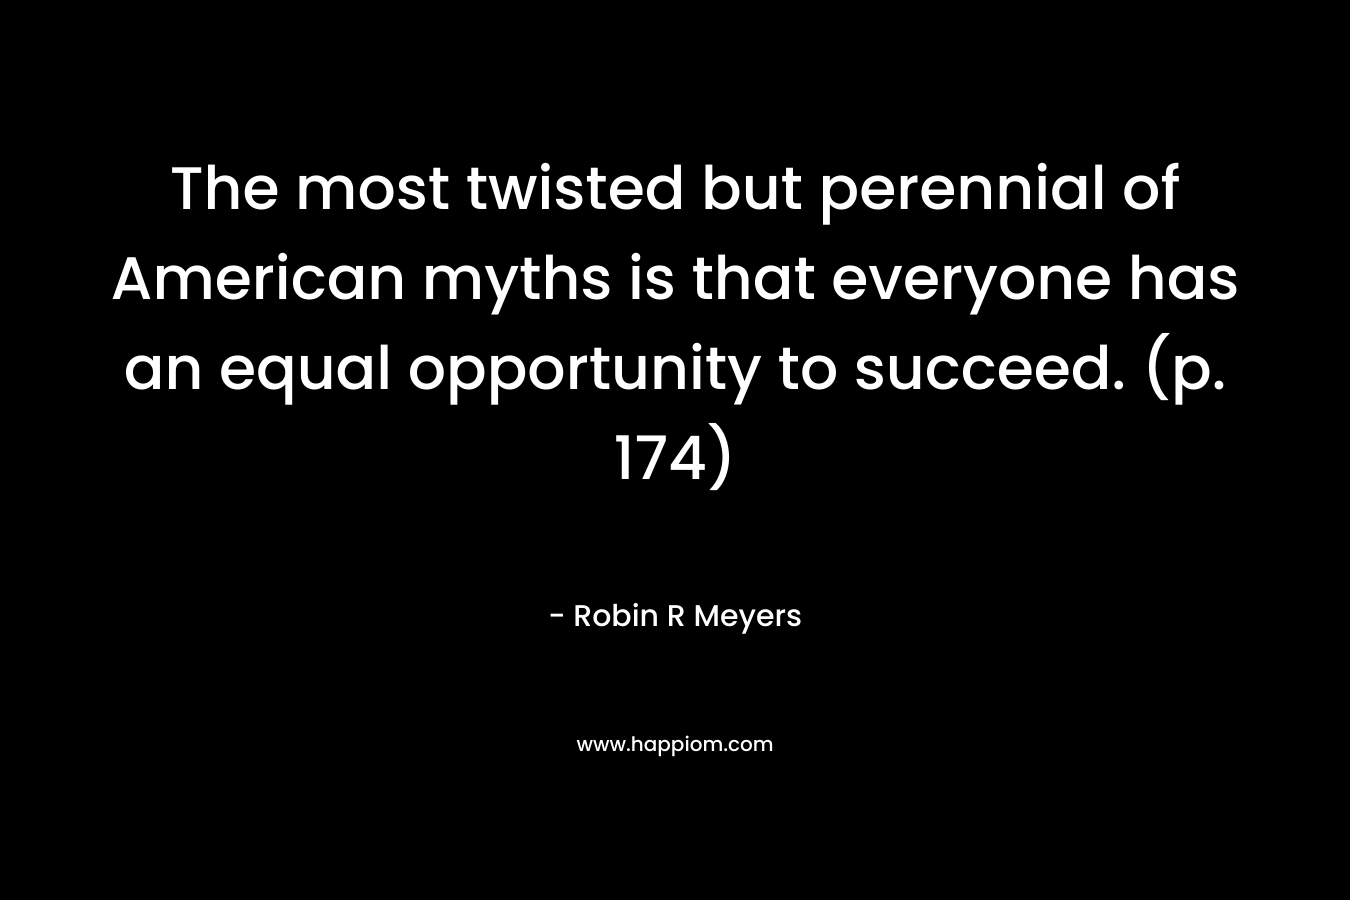 The most twisted but perennial of American myths is that everyone has an equal opportunity to succeed. (p. 174) – Robin R Meyers